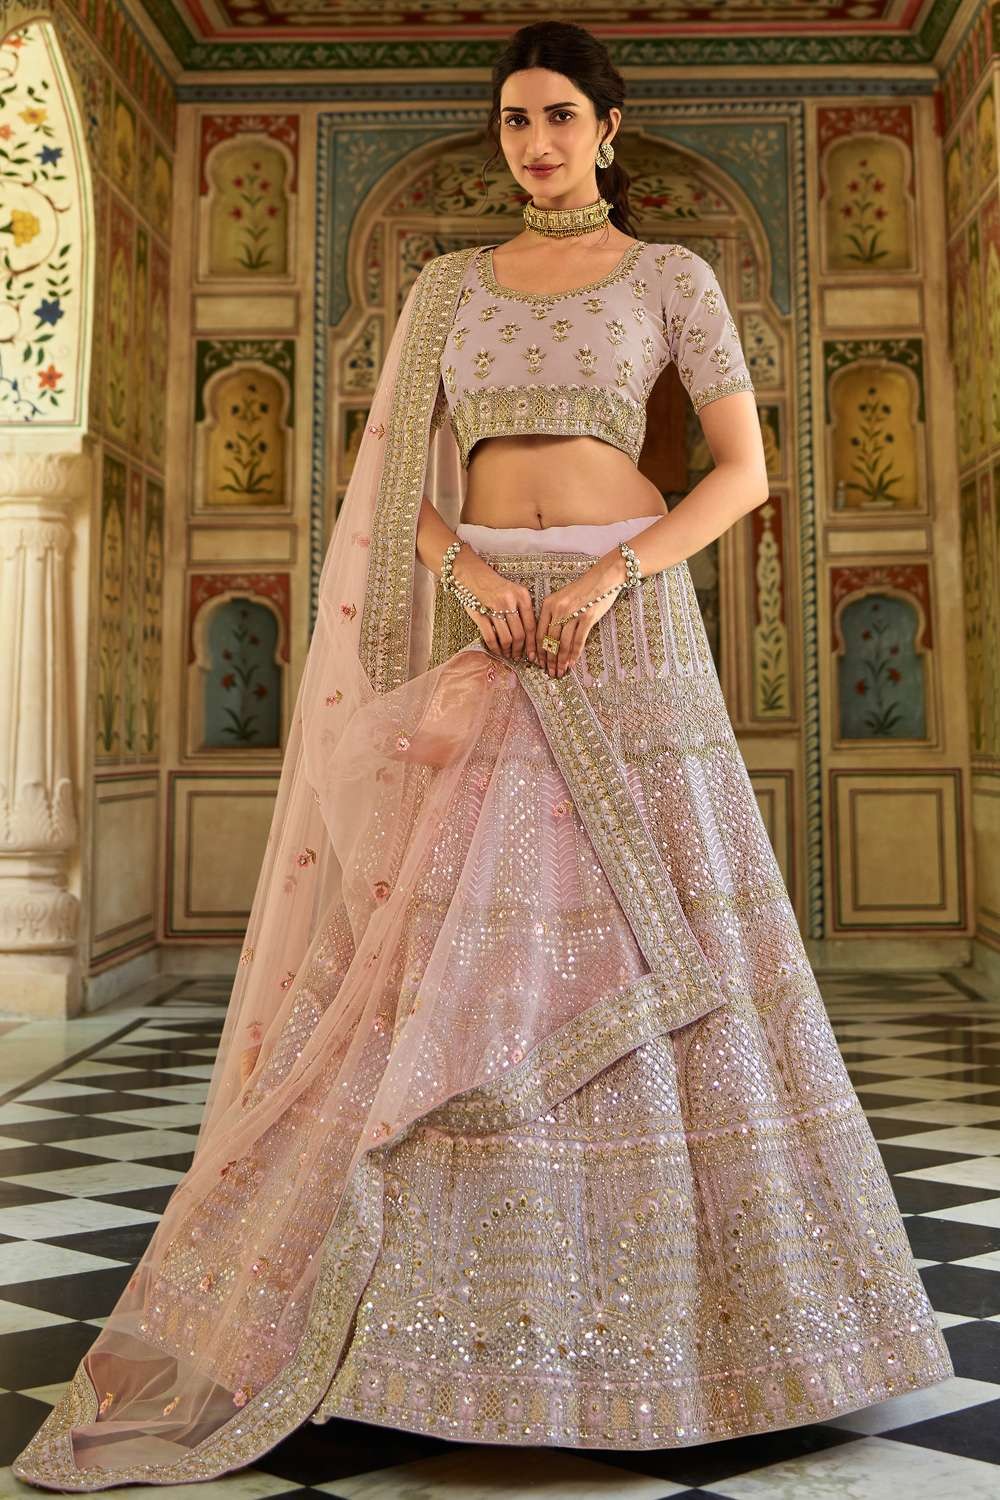 Photo of Light pink bridal lehenga with silver work and scalloped edge |  Indian bridal dress, Indian bridal outfits, Pink bridal lehenga